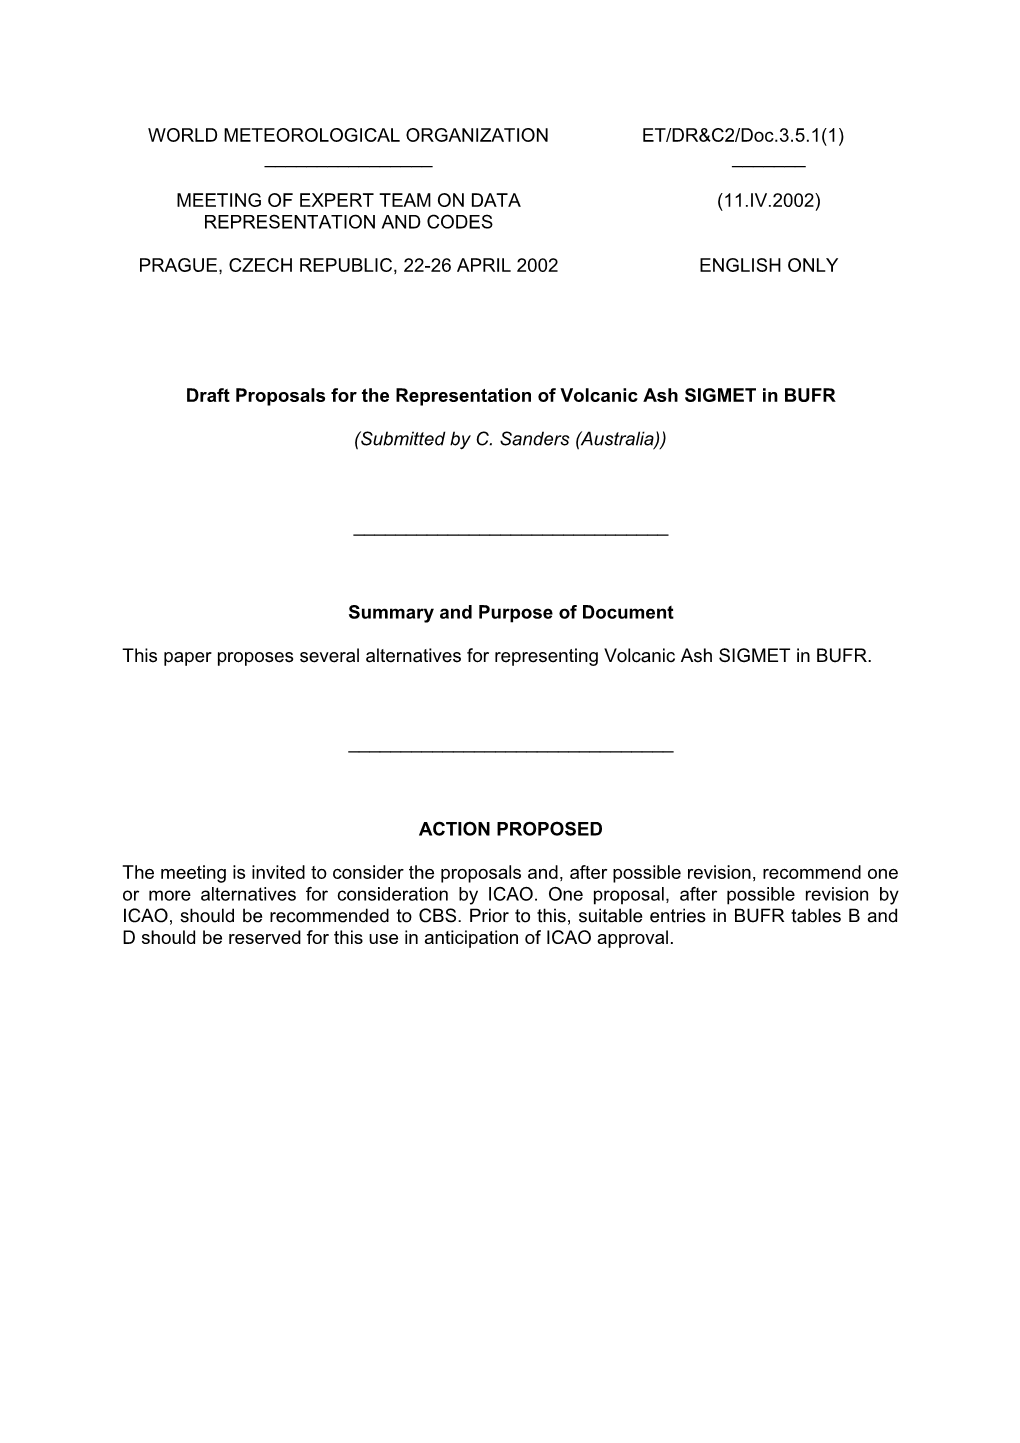 Draft Proposals for the Representation of Volcanic Ash SIGMET in BUFR